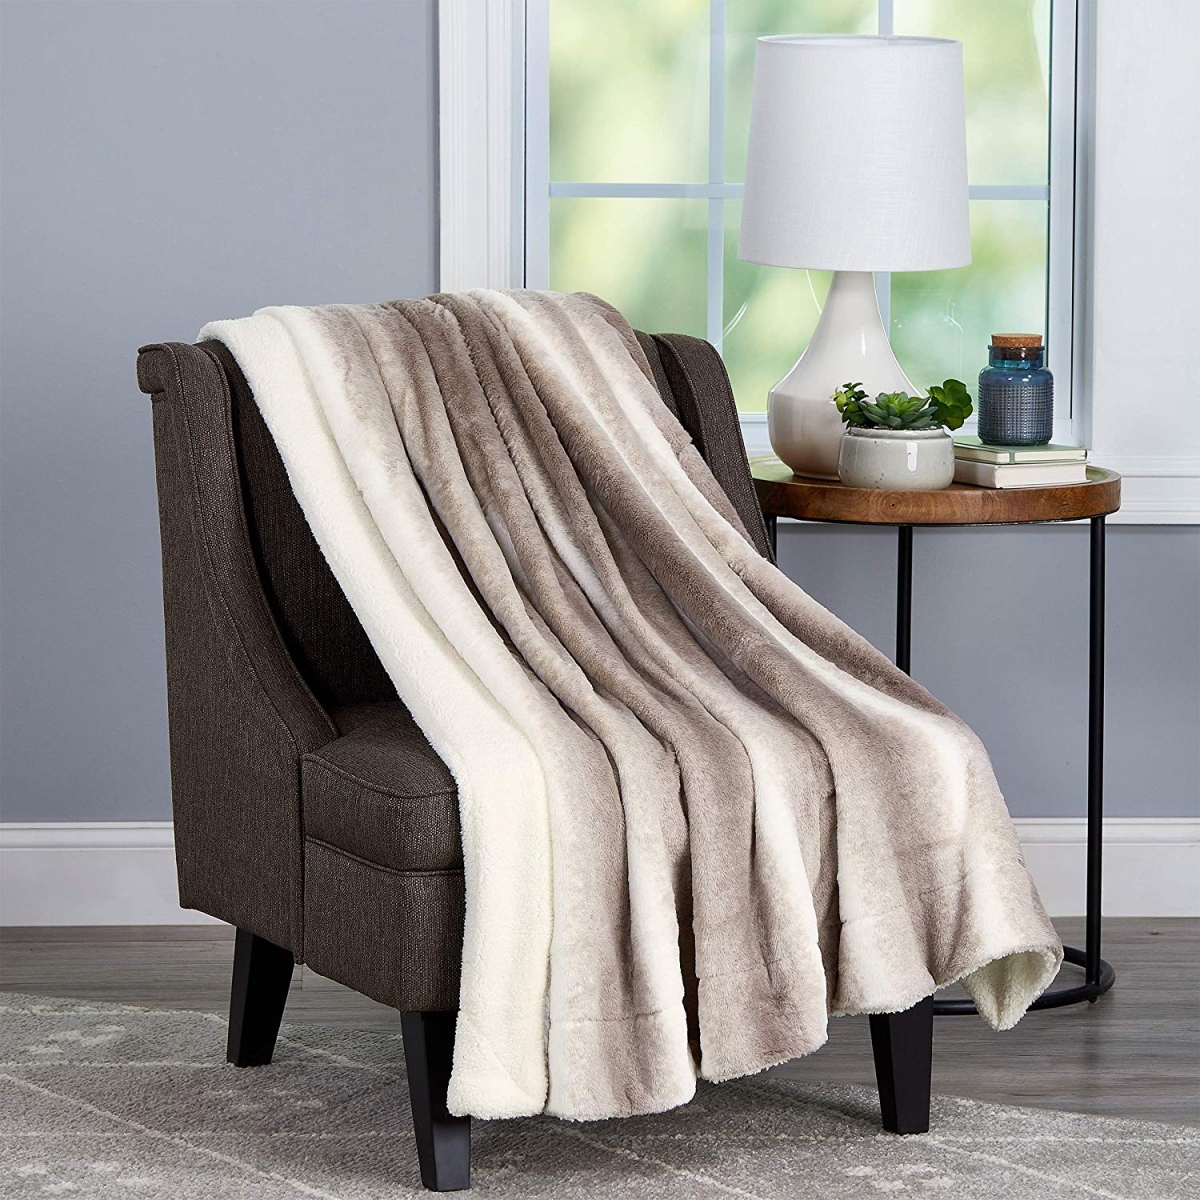 66a-34953 Soft Hypoallergenic Faux Rabbit Fur Blanket With Sherpa Back For Couch Throw Luxurious, 60 X 70 In. - Cream Beidge